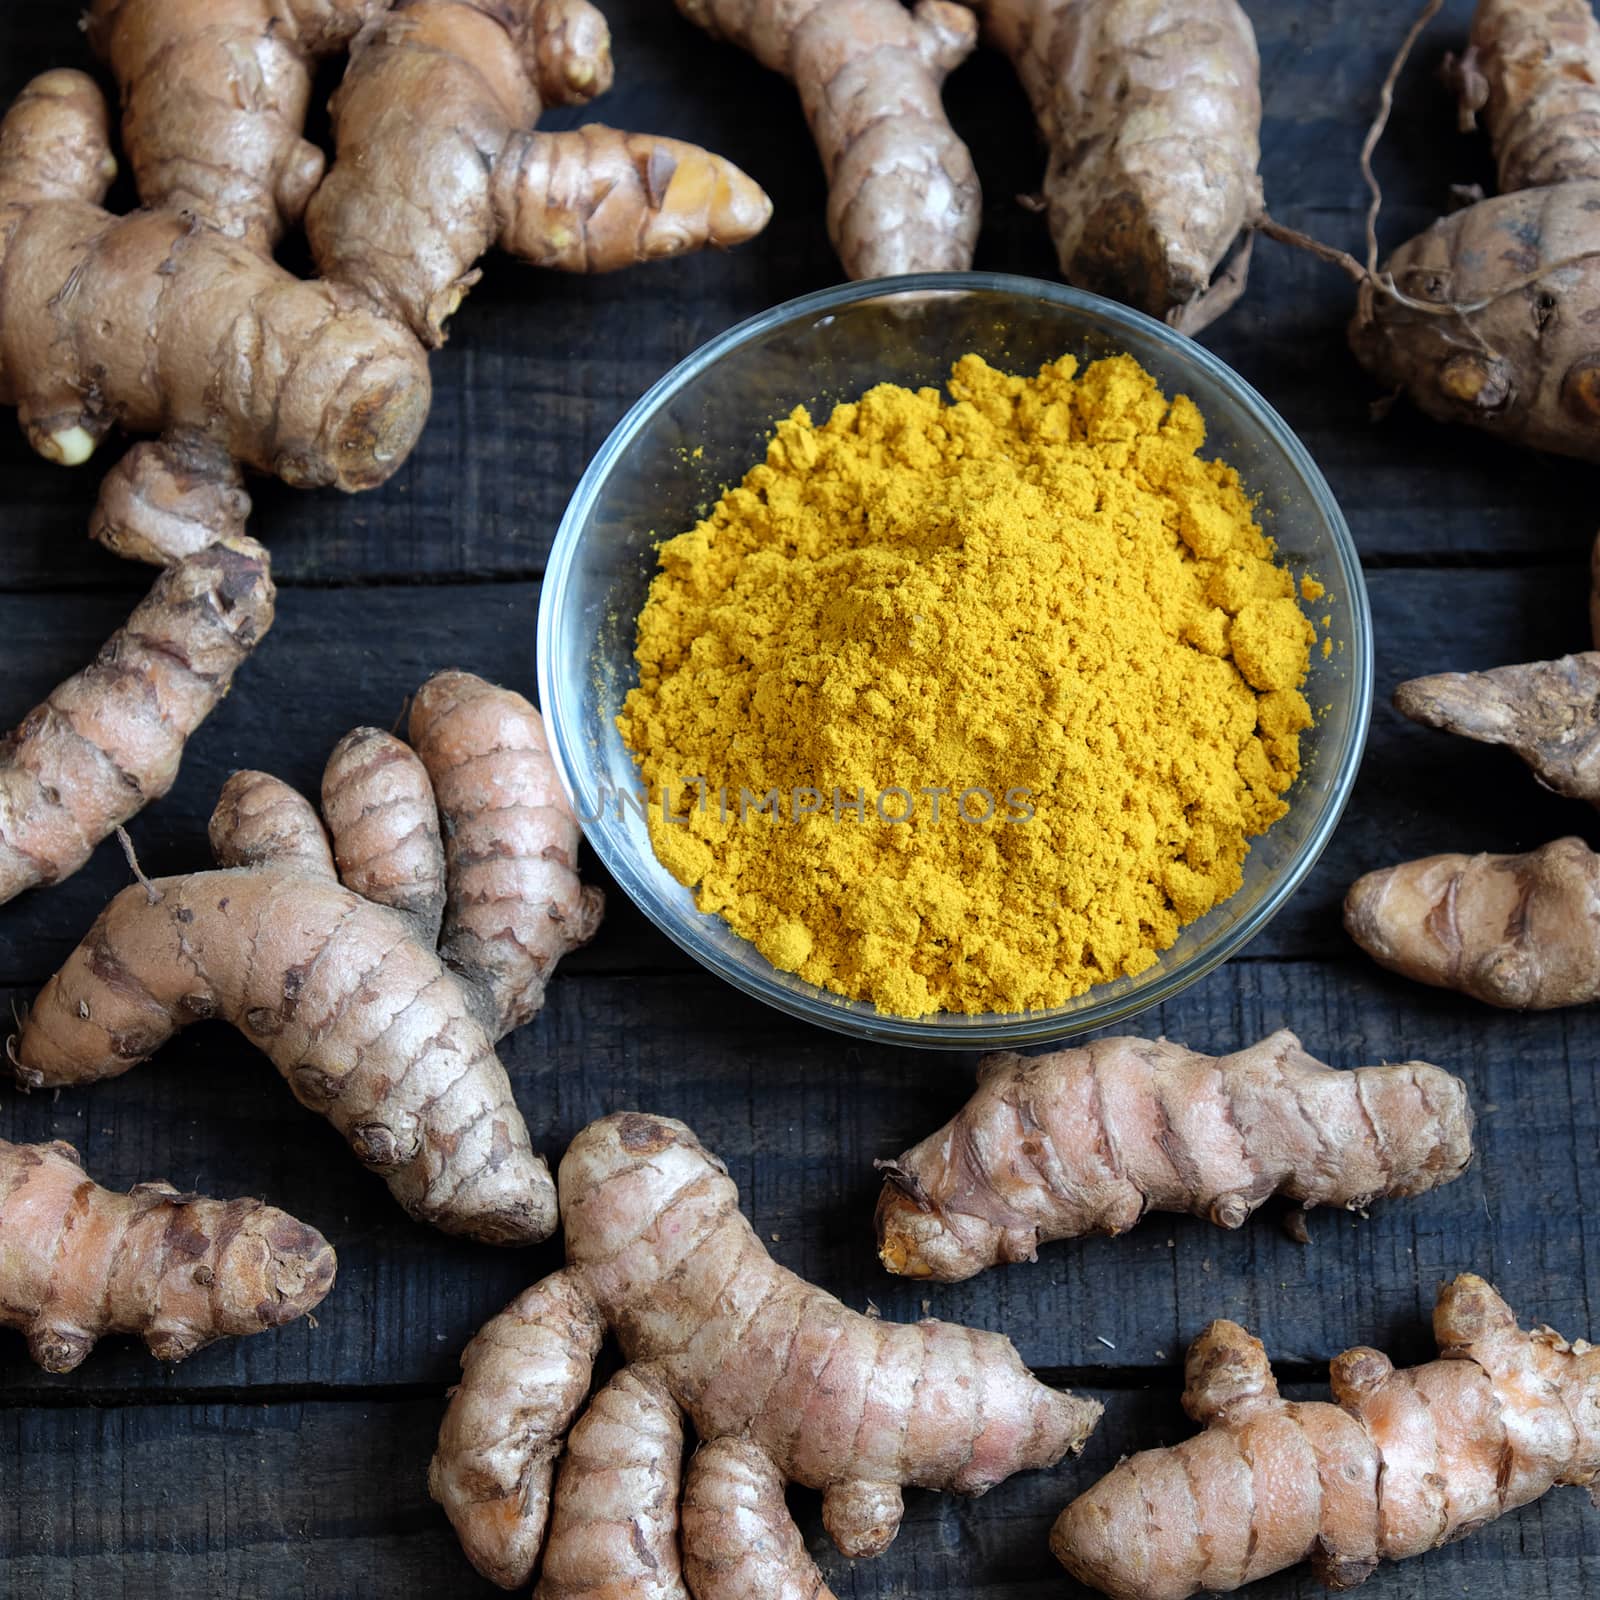 Turmeric powder, agriculture product, nutrition, healthy food, natural cosmetic for beauty care, can treat stomach ache, also is spice for food,  aromatic flavor, organic yellow color